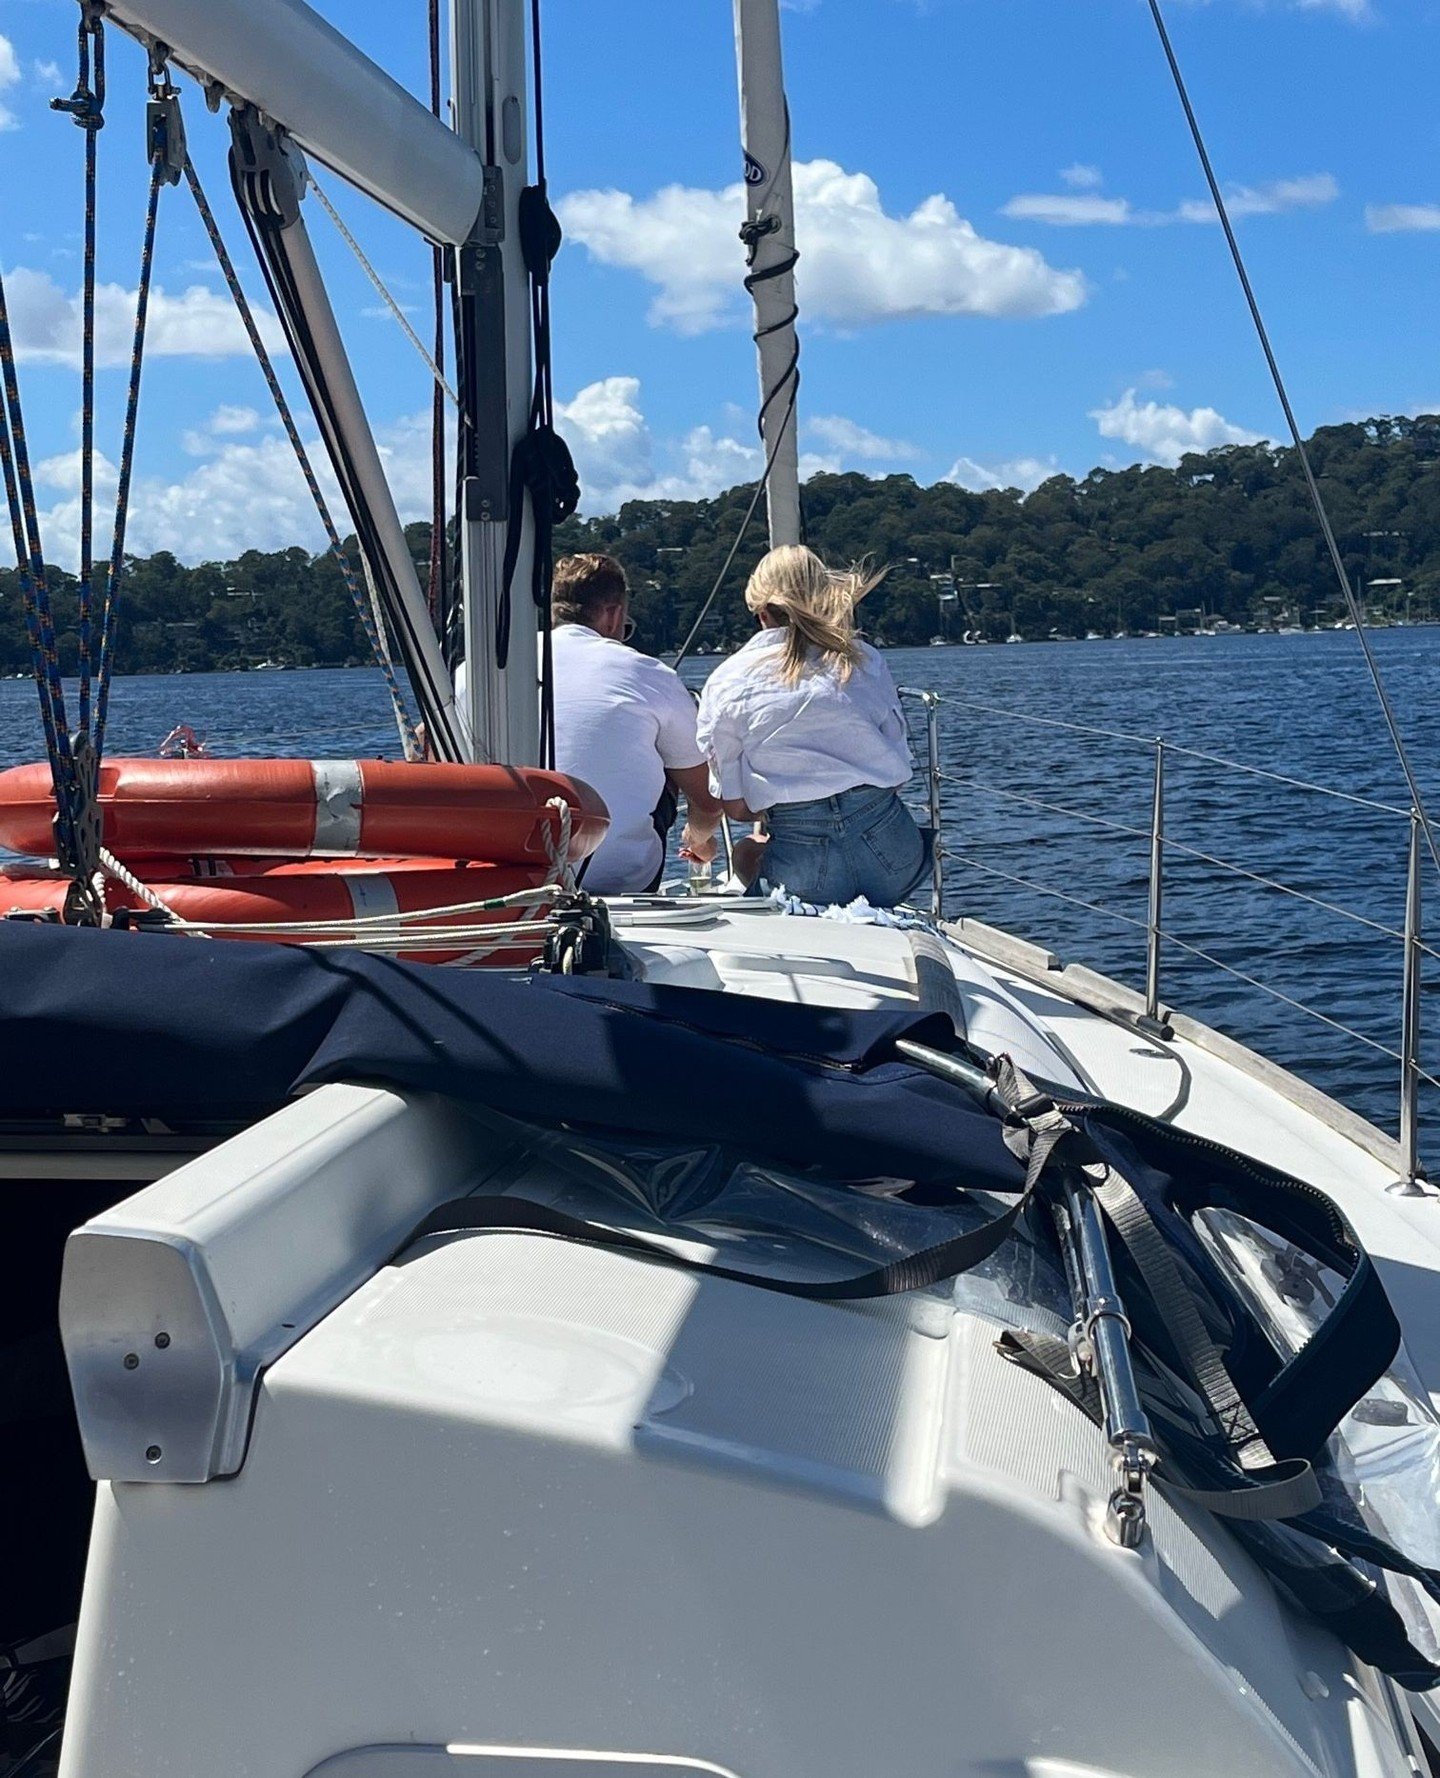 A long weekend starting Friday 26th or Saturday 27th April on a yacht sounds delightful! The combination of a two-night yacht stay with a 3-hour skippered charter offers the perfect balance of relaxation and adventure. And adding an optional platter 